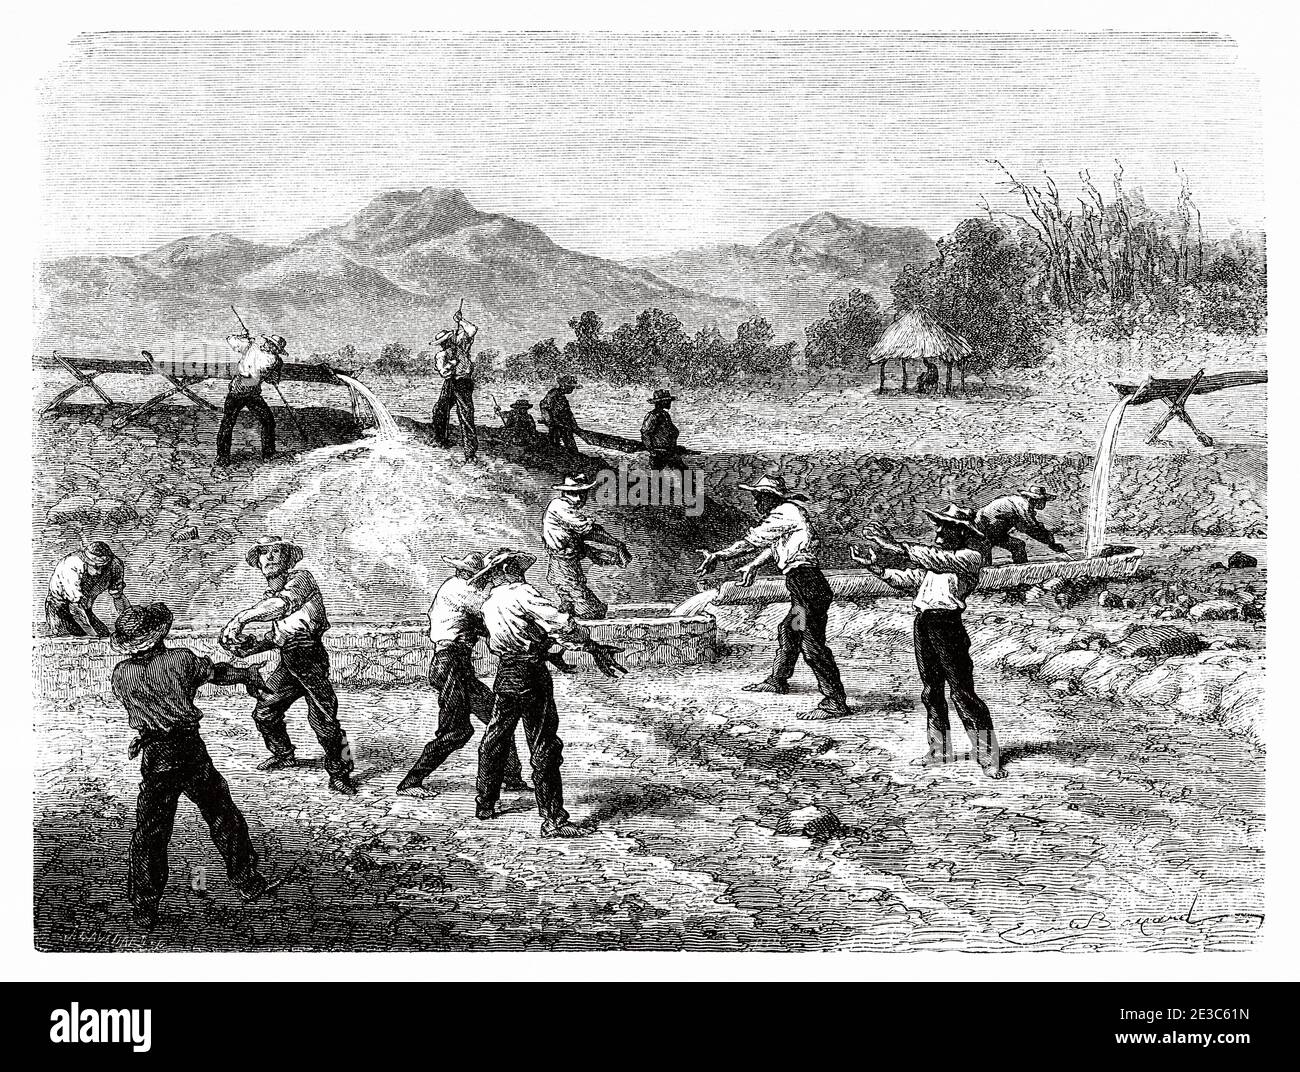 Miners working on alluvial gold exploitation, Cauca Department, Colombia. Old 19th century engraved illustration. Travel to New Granada by Charles Saffray from El Mundo en La Mano 1879 Stock Photo